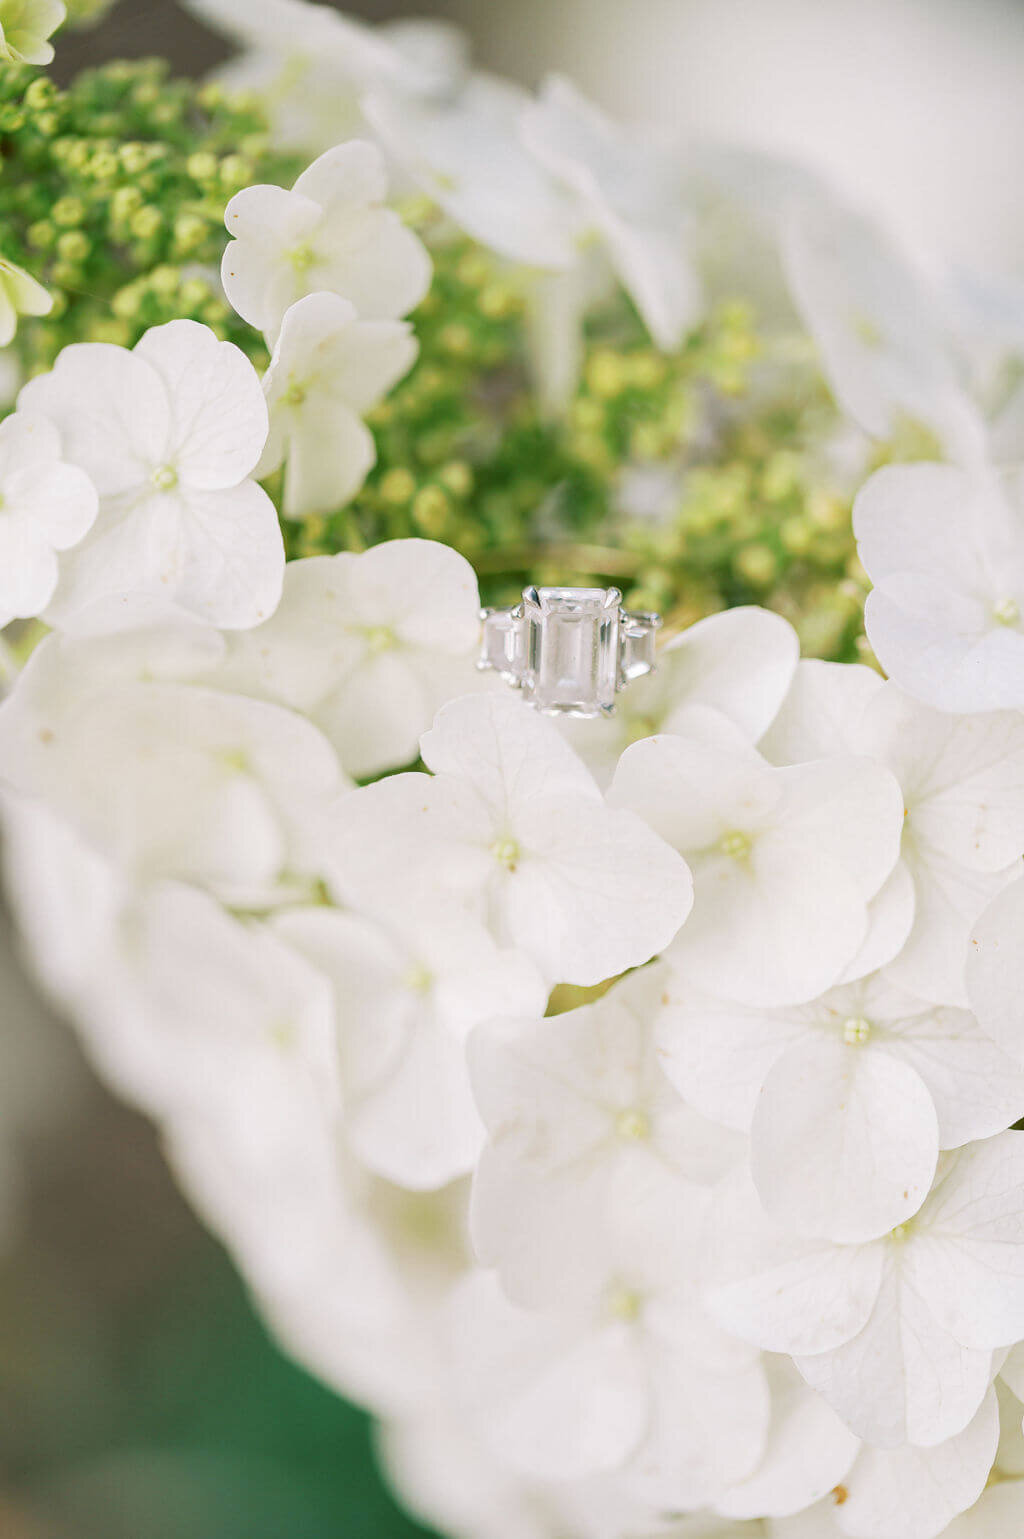 Detail image of a diamond ring tucked into a white hydrangea, captured by Rachael Mattio, a DC wedding photographer